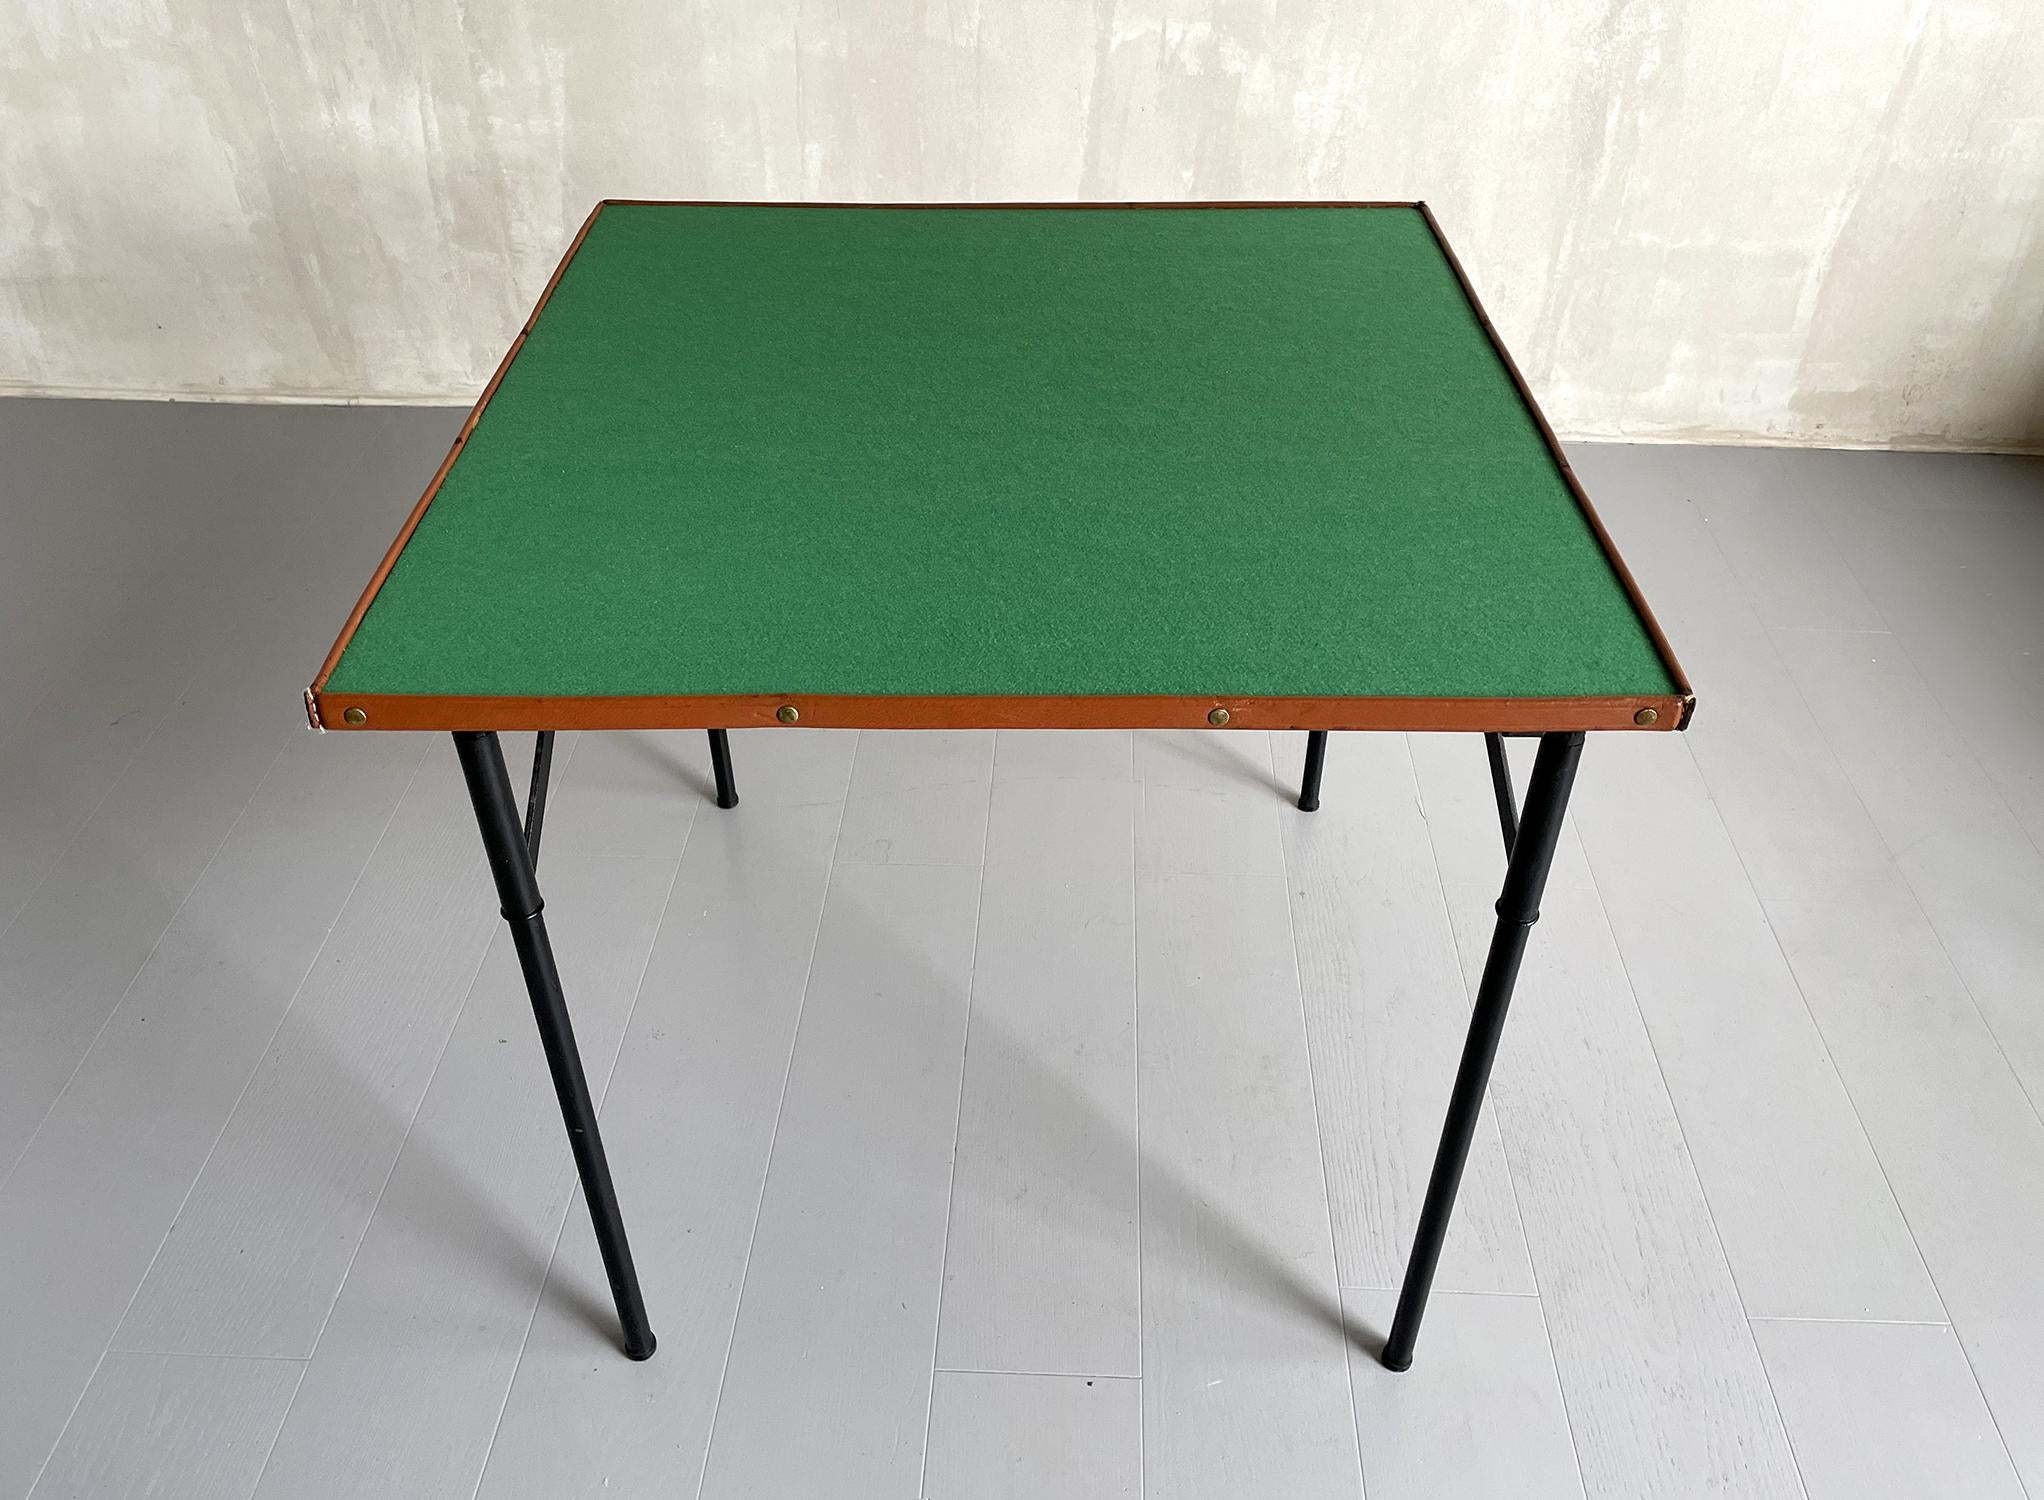 Jacques Adnet, folding game table in lacquered metal, brass and stitched leather, France 1950. The top is lined with green felt, surrounded by a stitched and studded leather border. The four legs are locked by a golden brass ring, they fold up and